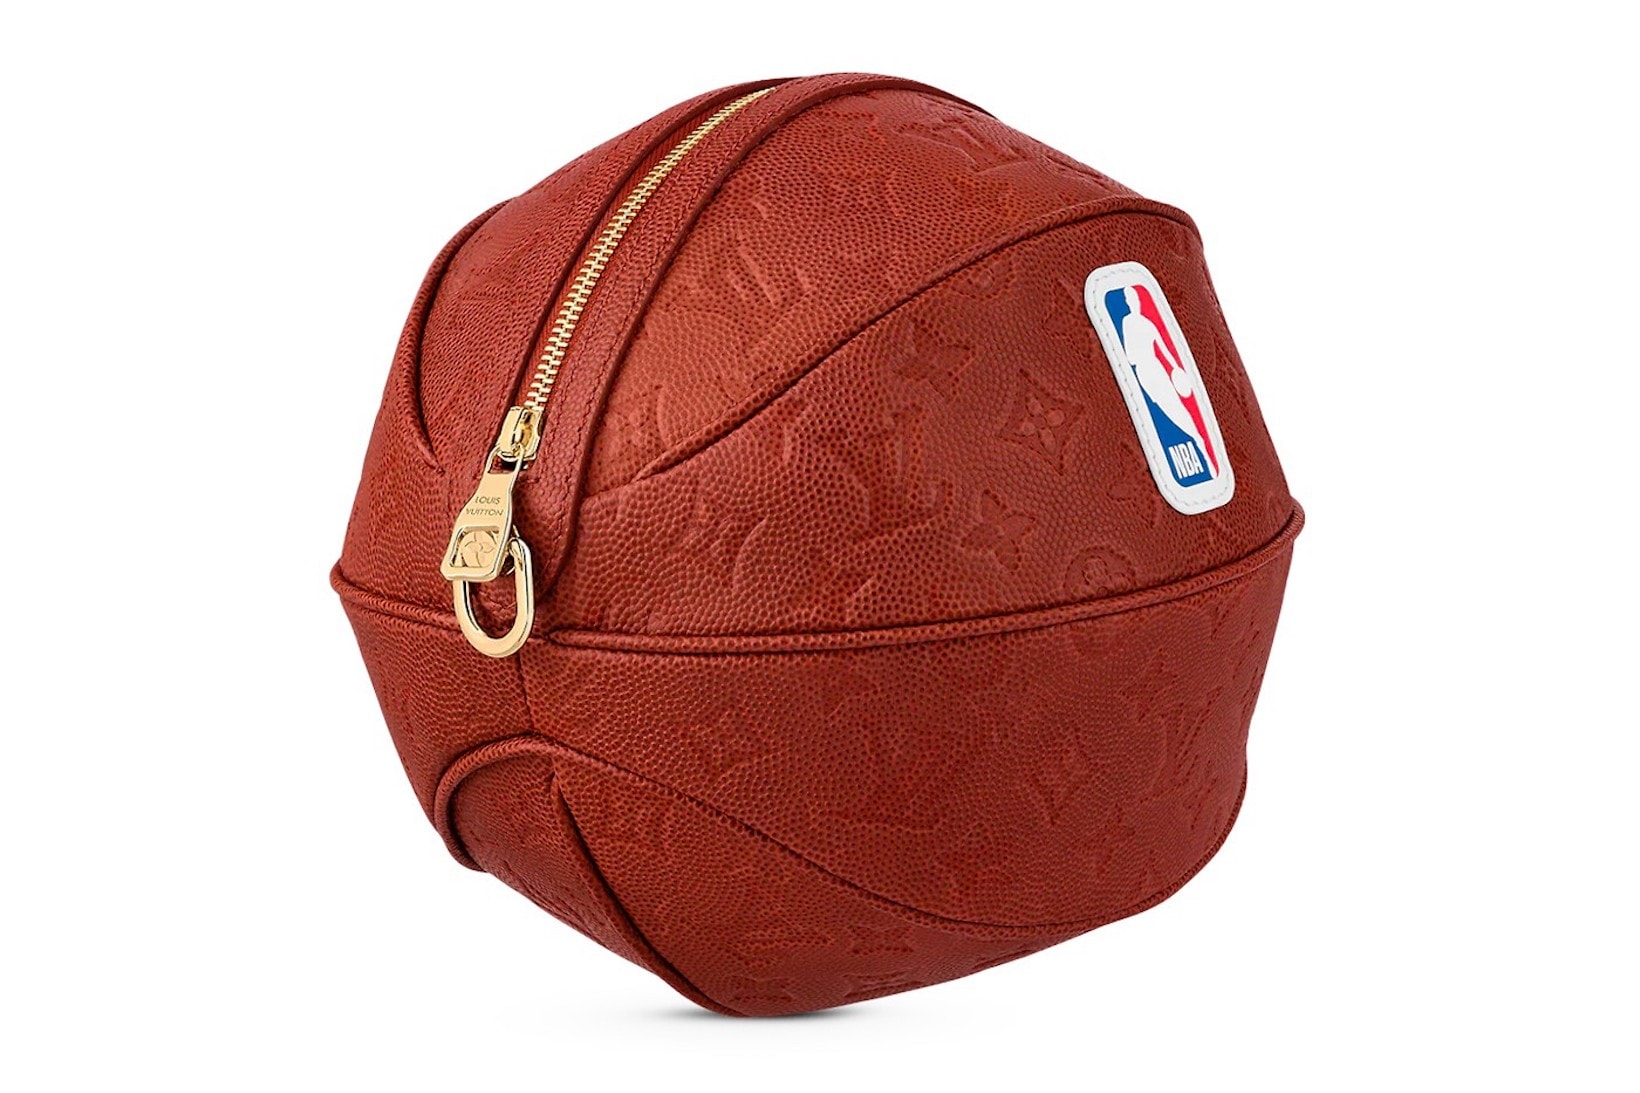 NBA Louis Vuitton Ball in Basket Bag Accessory Brown Leather